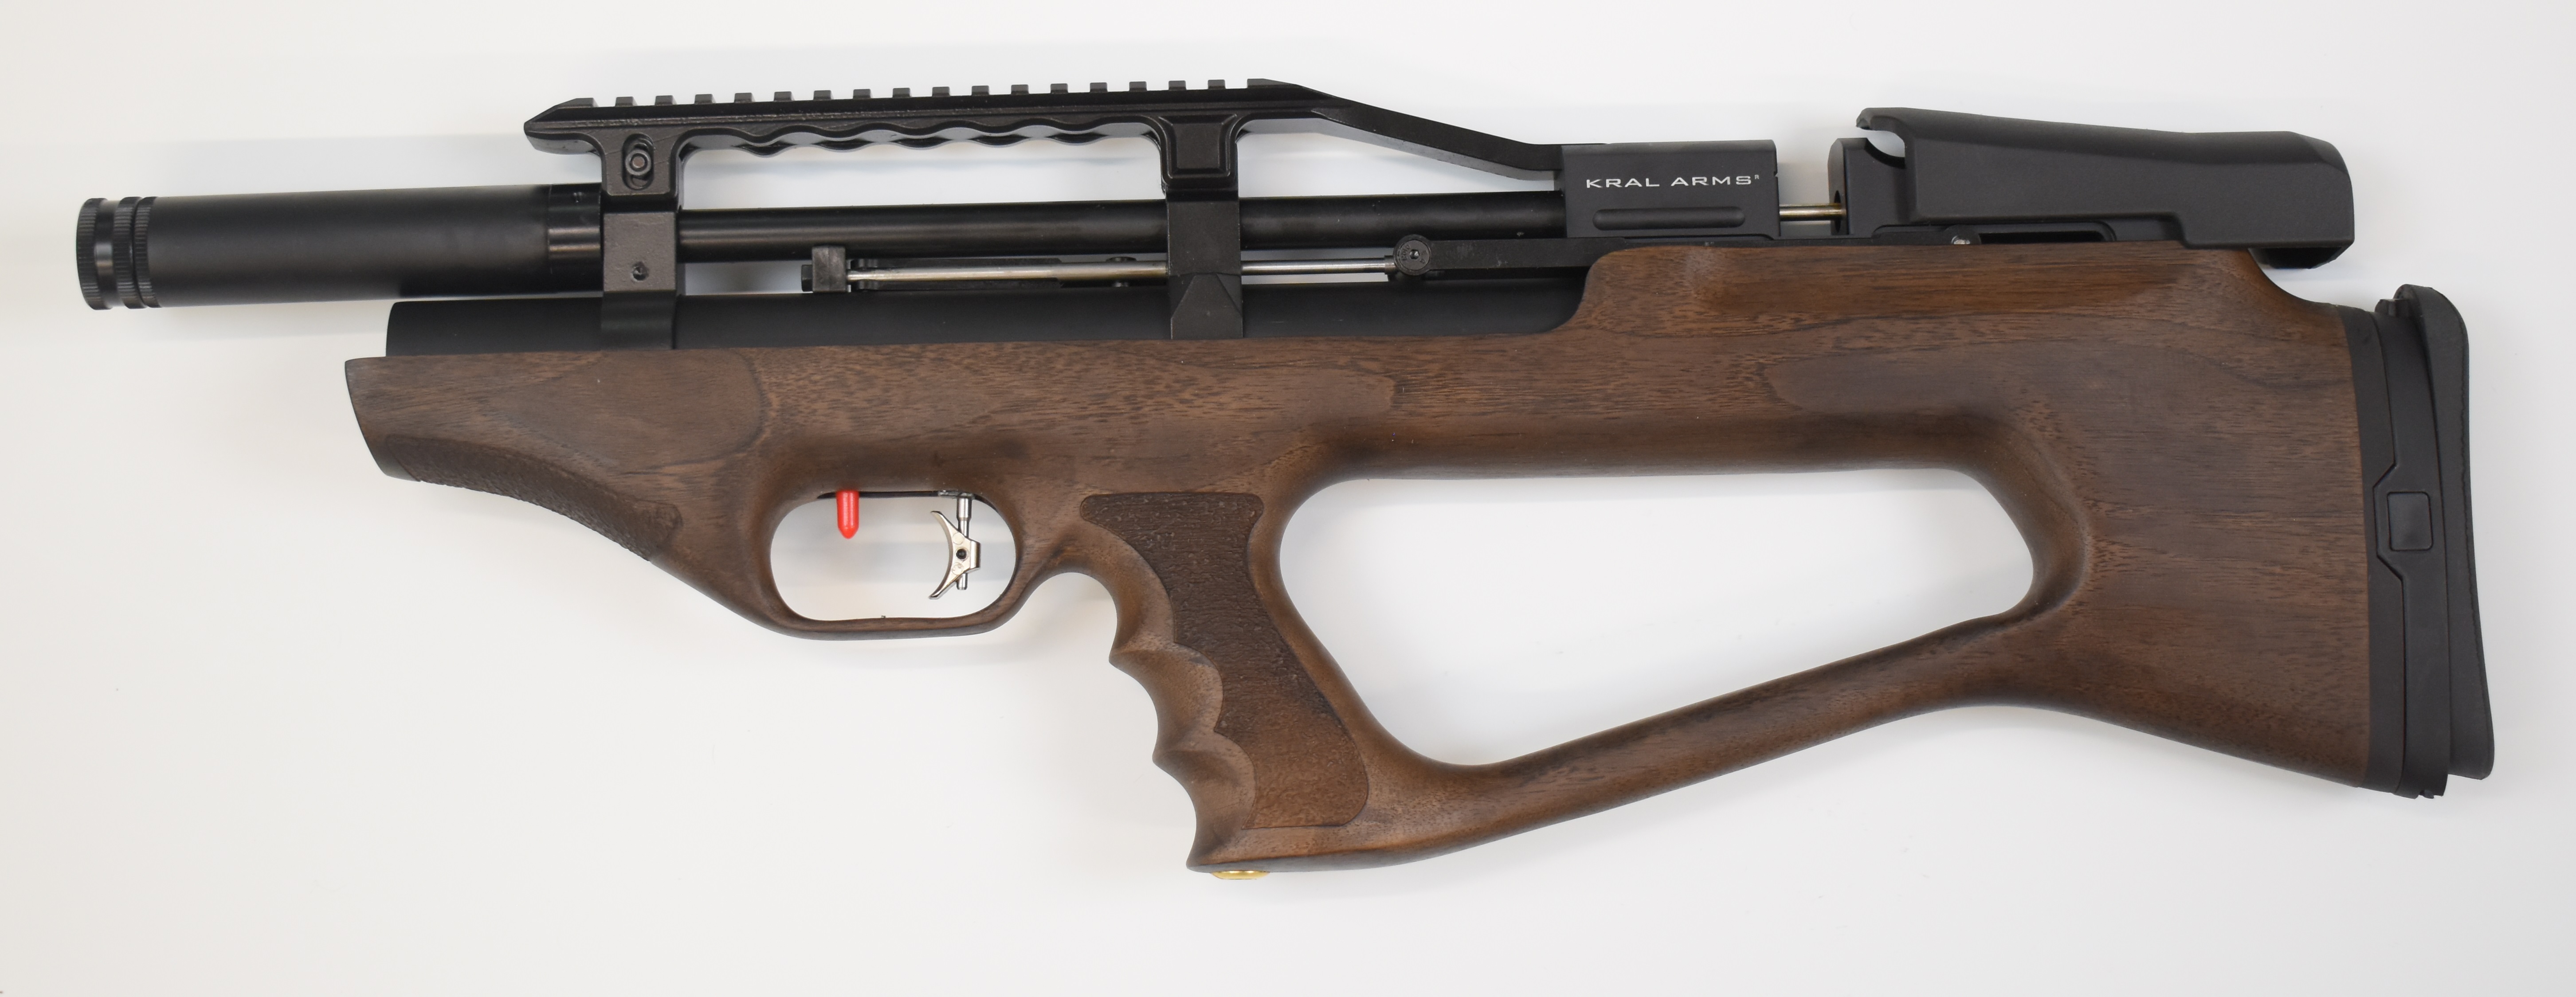 Kral Puncher Empire XS .177 PCP carbine air rifle with textured pistol grip, two 14-shot magazines - Image 6 of 9